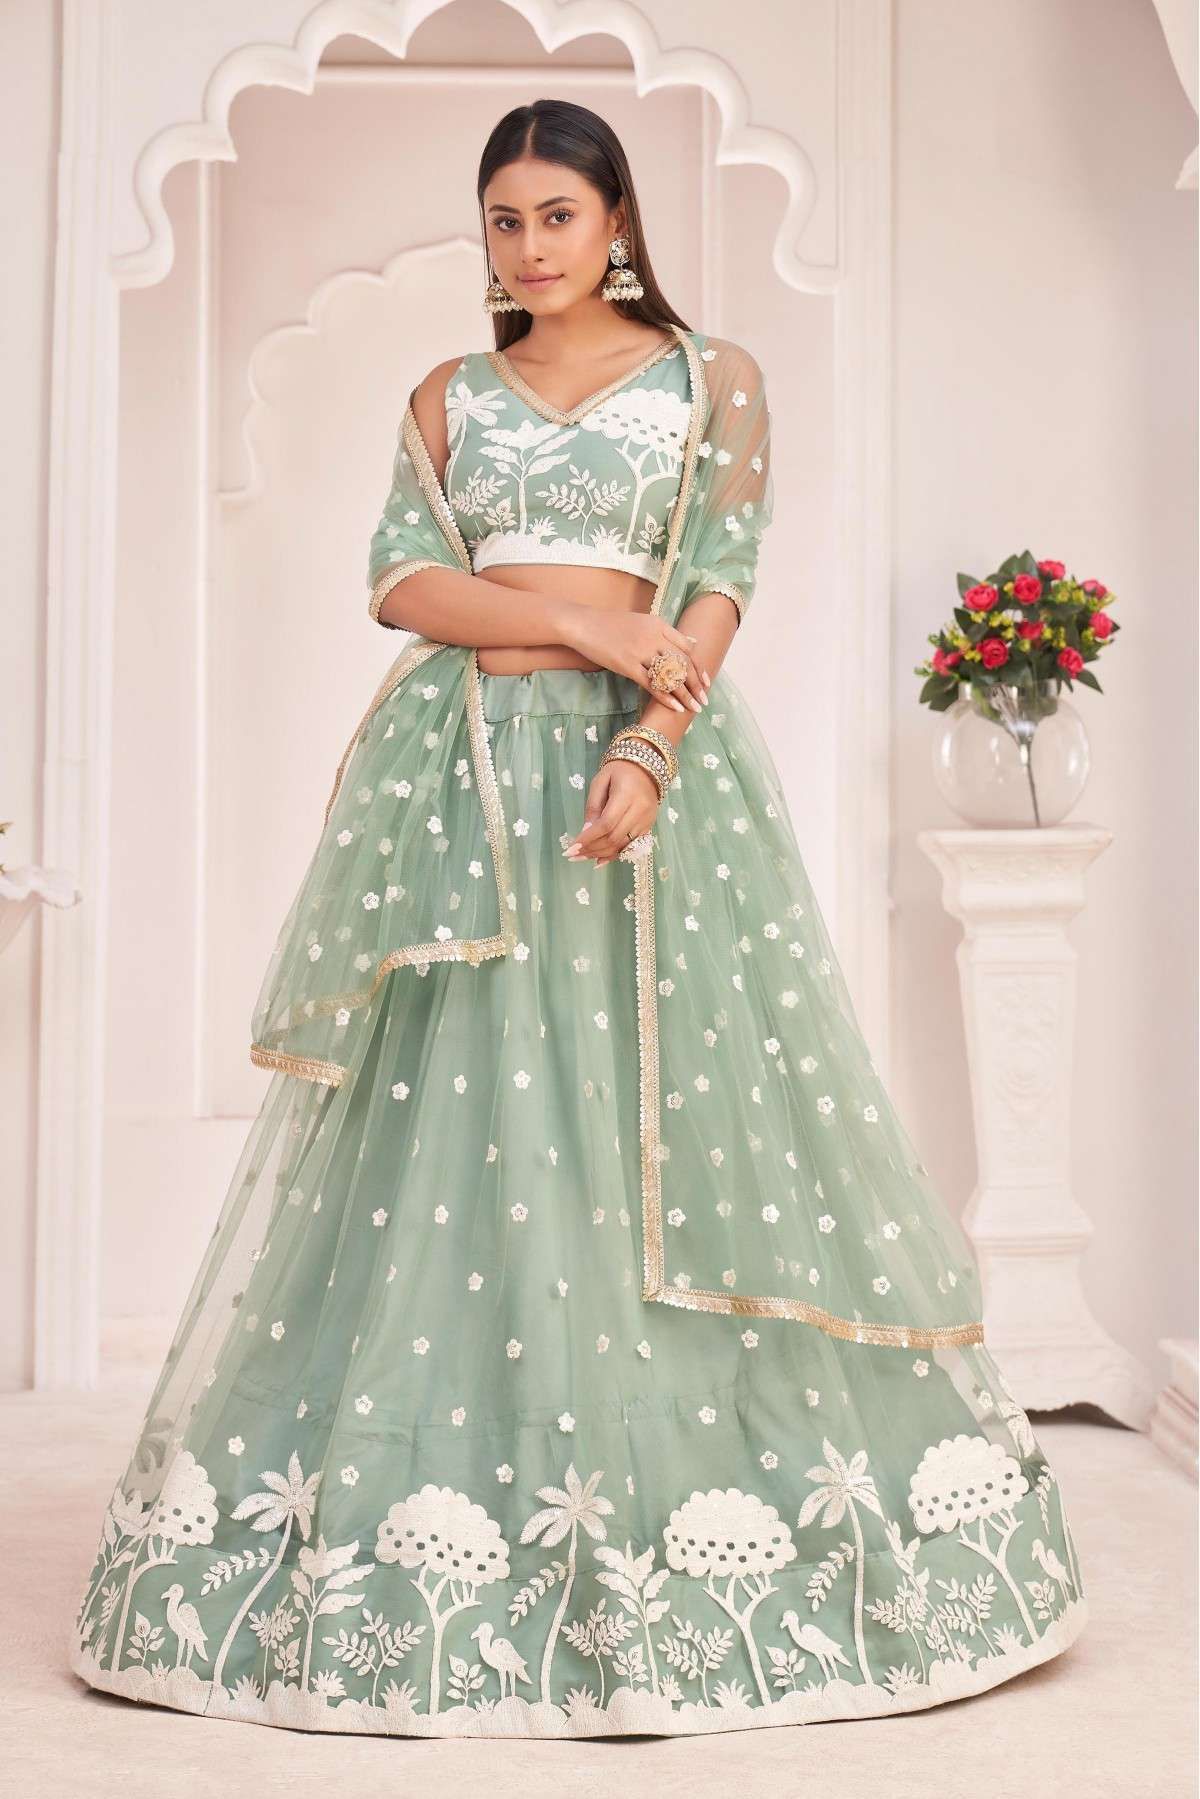 Butterfly Net Embroidery Lehenga Choli In Pista Green Colour - LD5416177